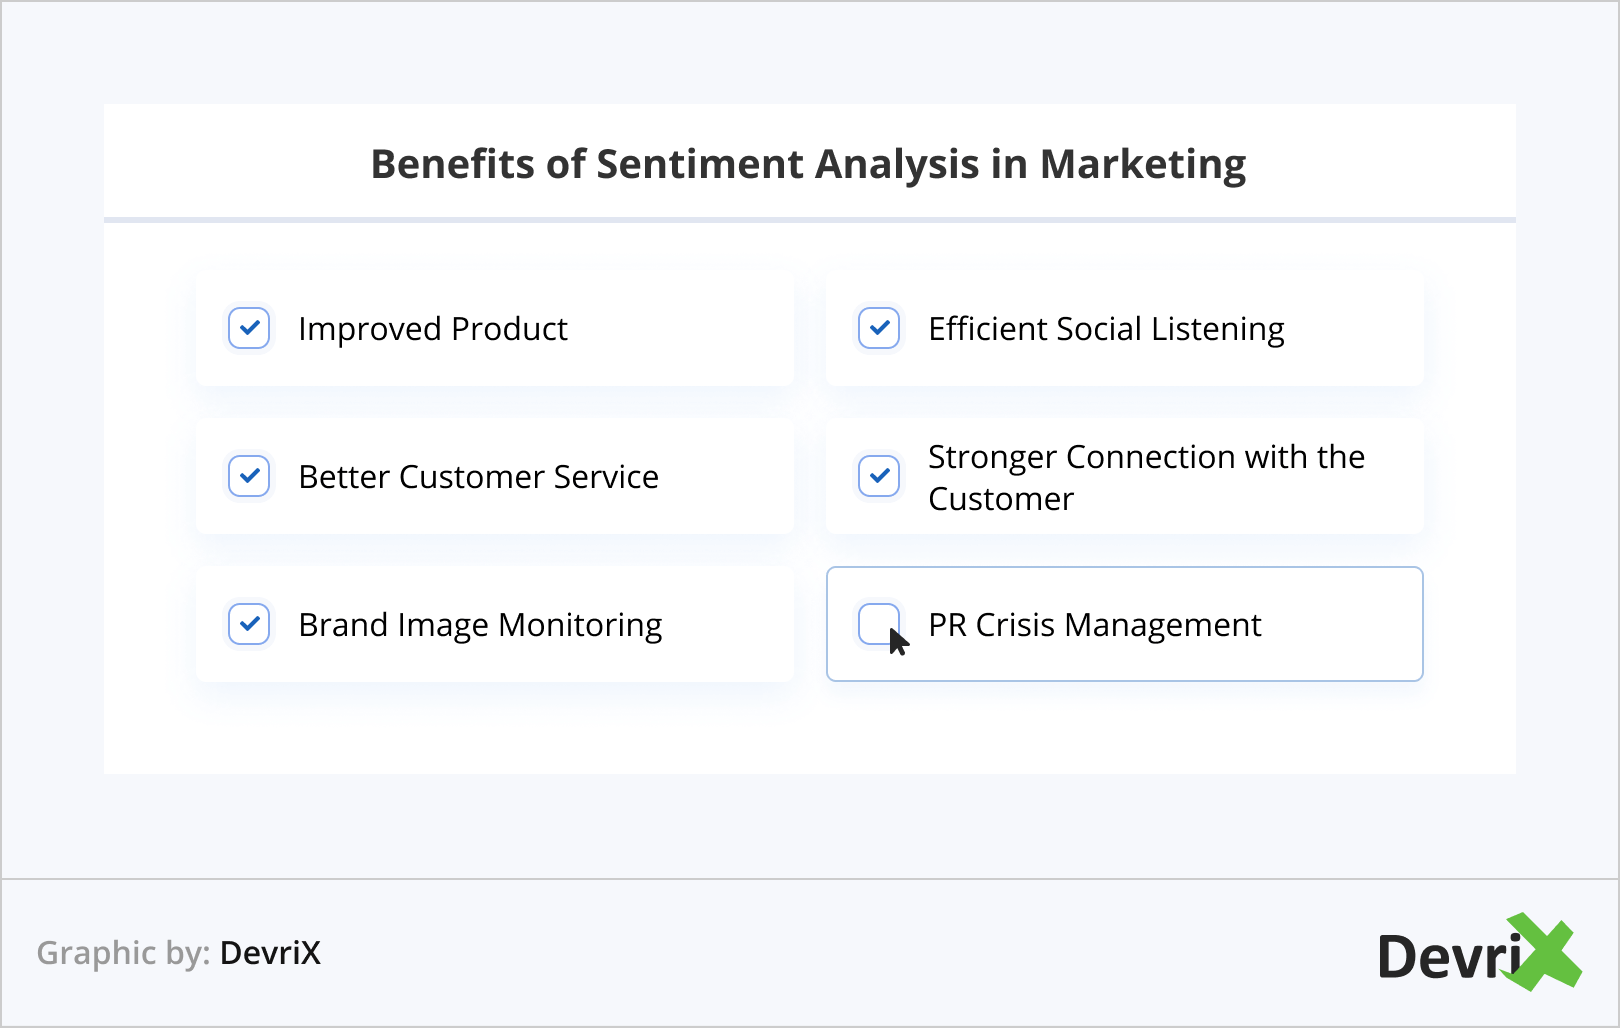 Benefits of Sentiment Analysis in Marketing